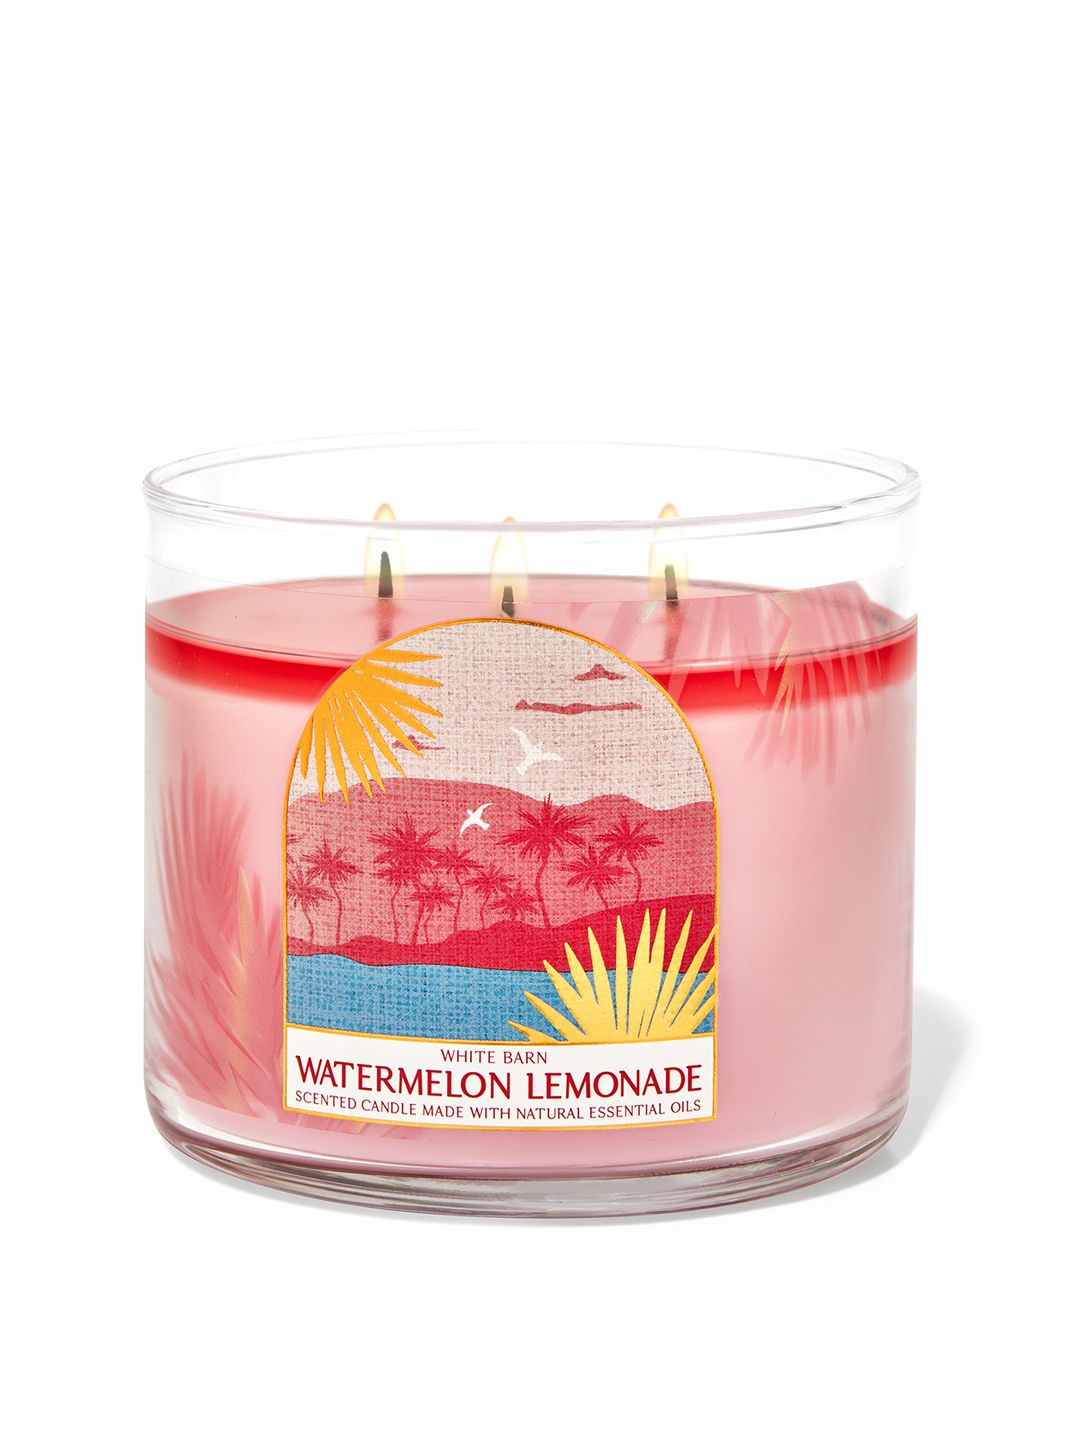 Bath & Body Works Watermelon Lemonade 3-Wick Scented Candle with Essential Oils - 411g Price in India